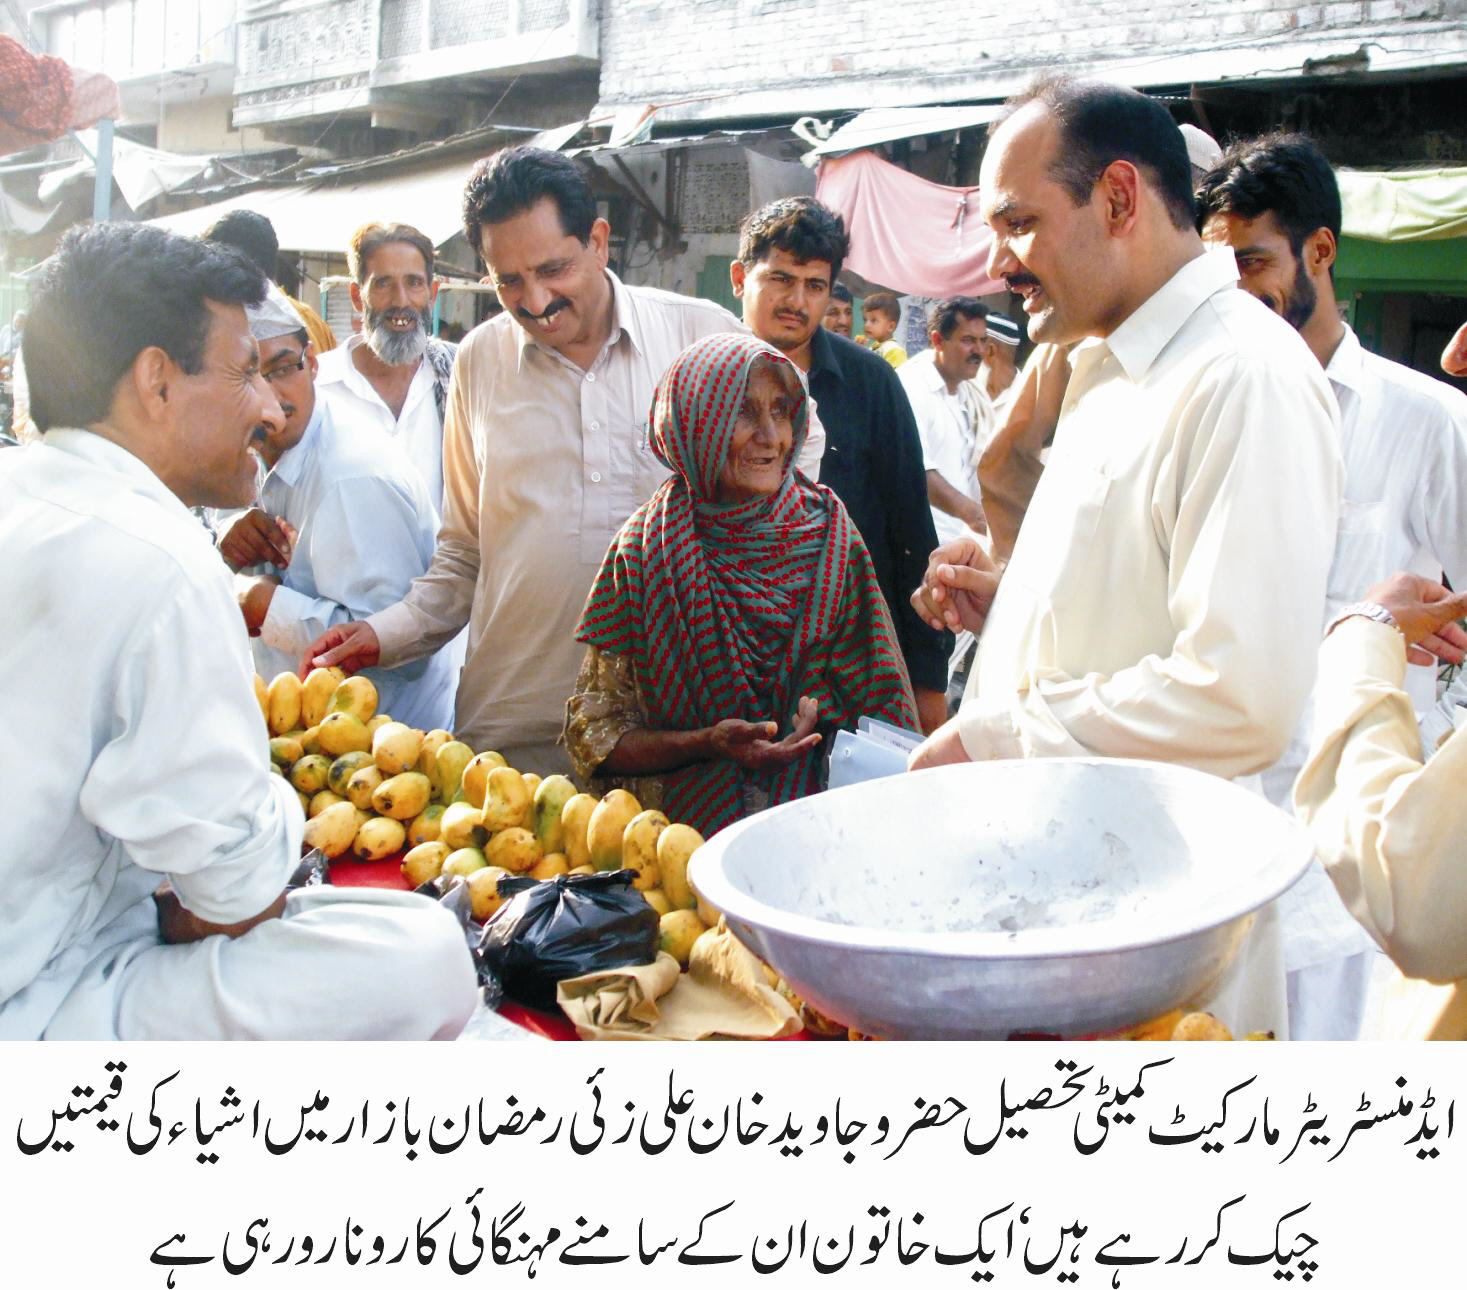 a market committee administrator checks on prices of items at a market photo agencies